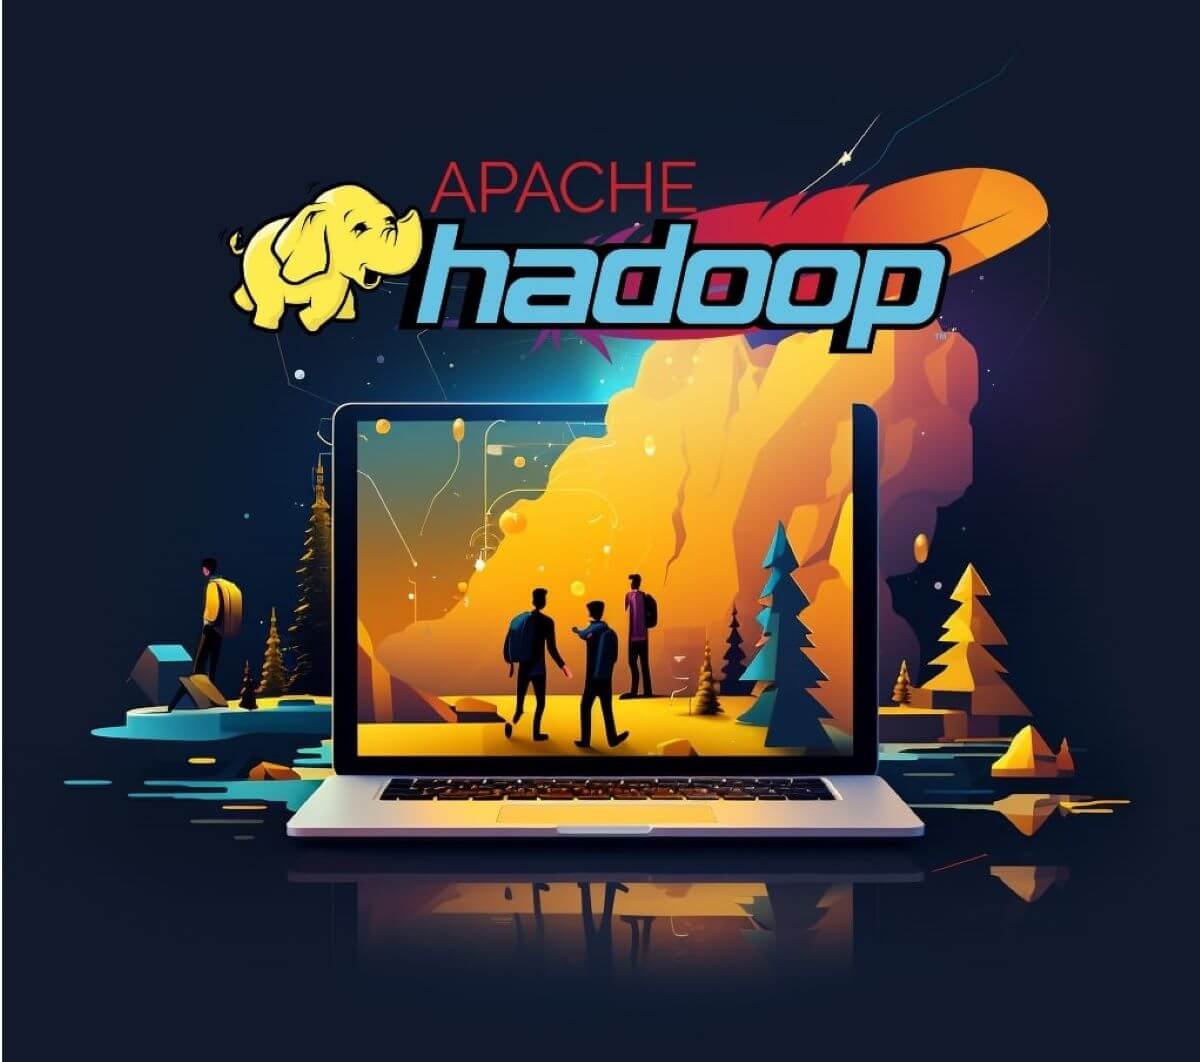 The logo for Apache Hadoop showcases its prowess in Business Intelligence on Hadoop.